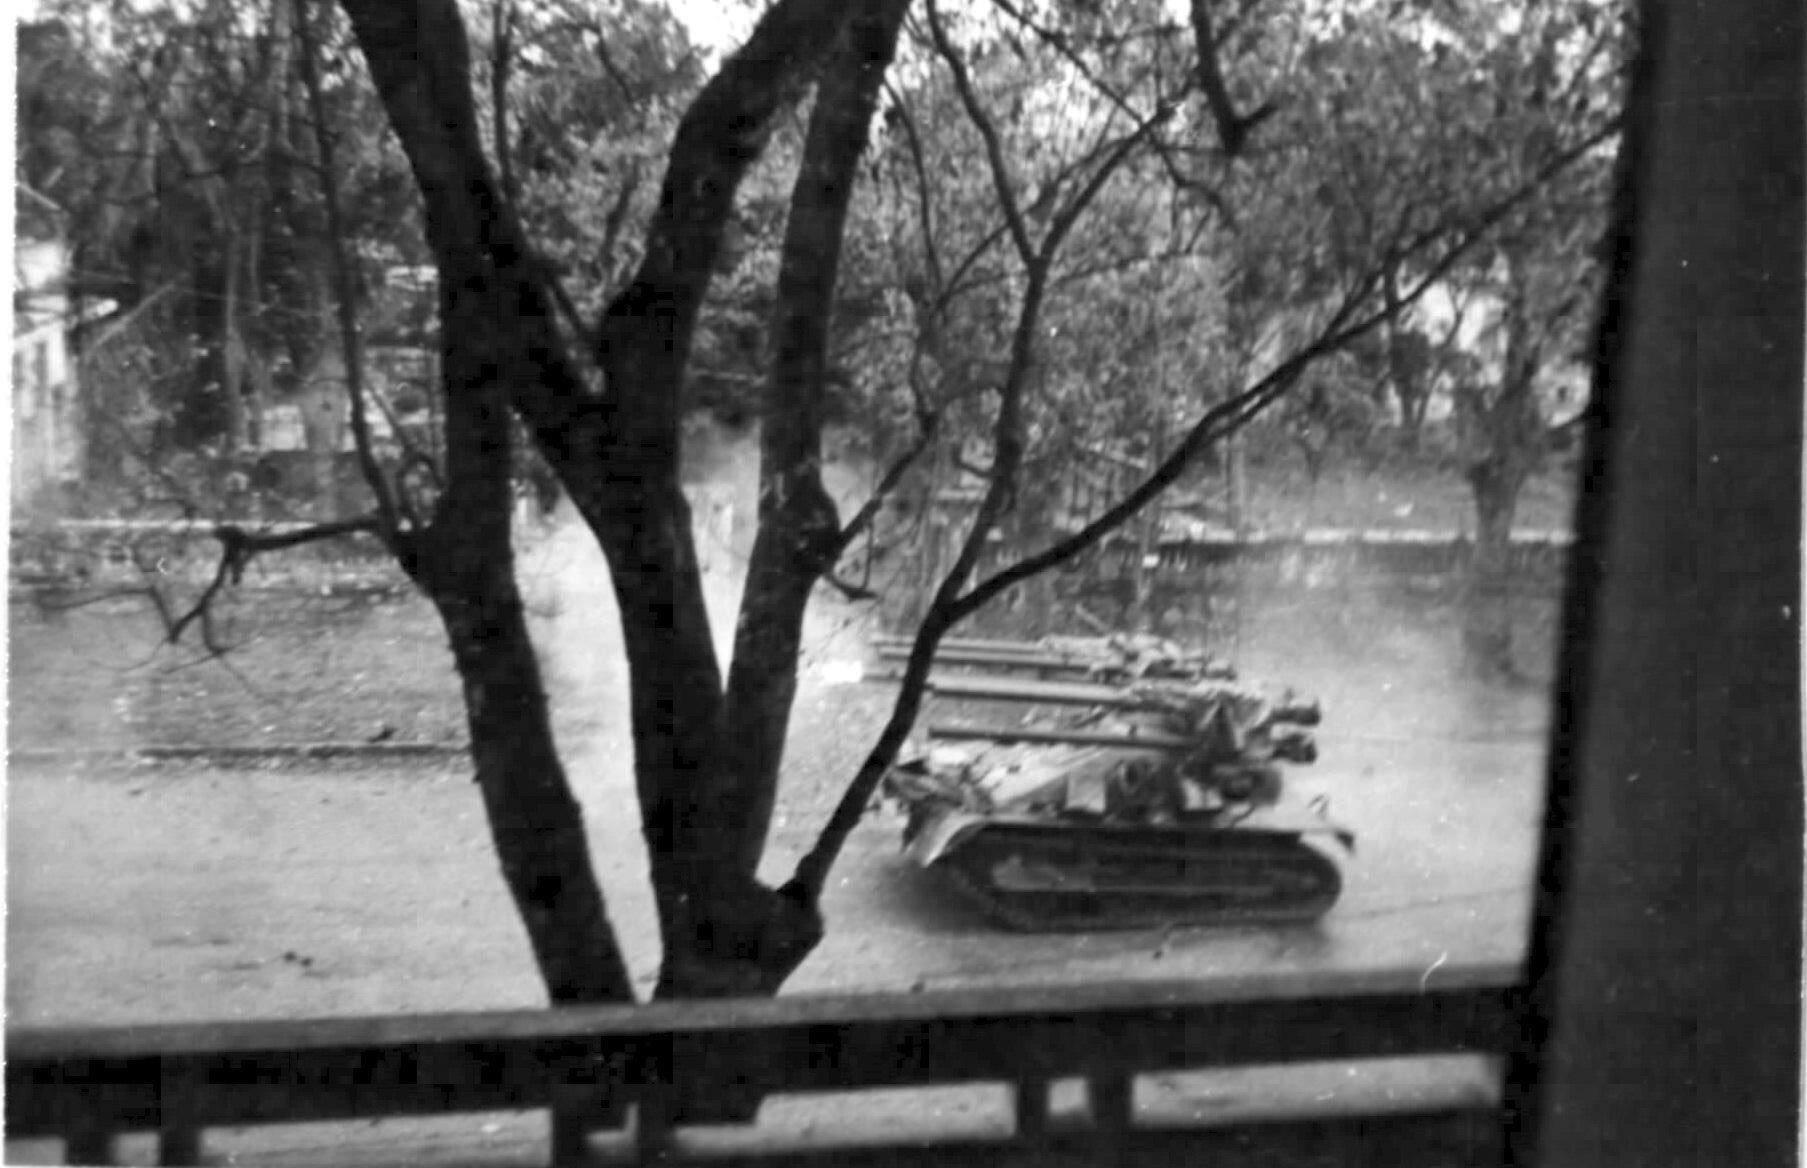 An Ontos hunts snipers and weapons bunkers in Hue City during the Tet Offensive.